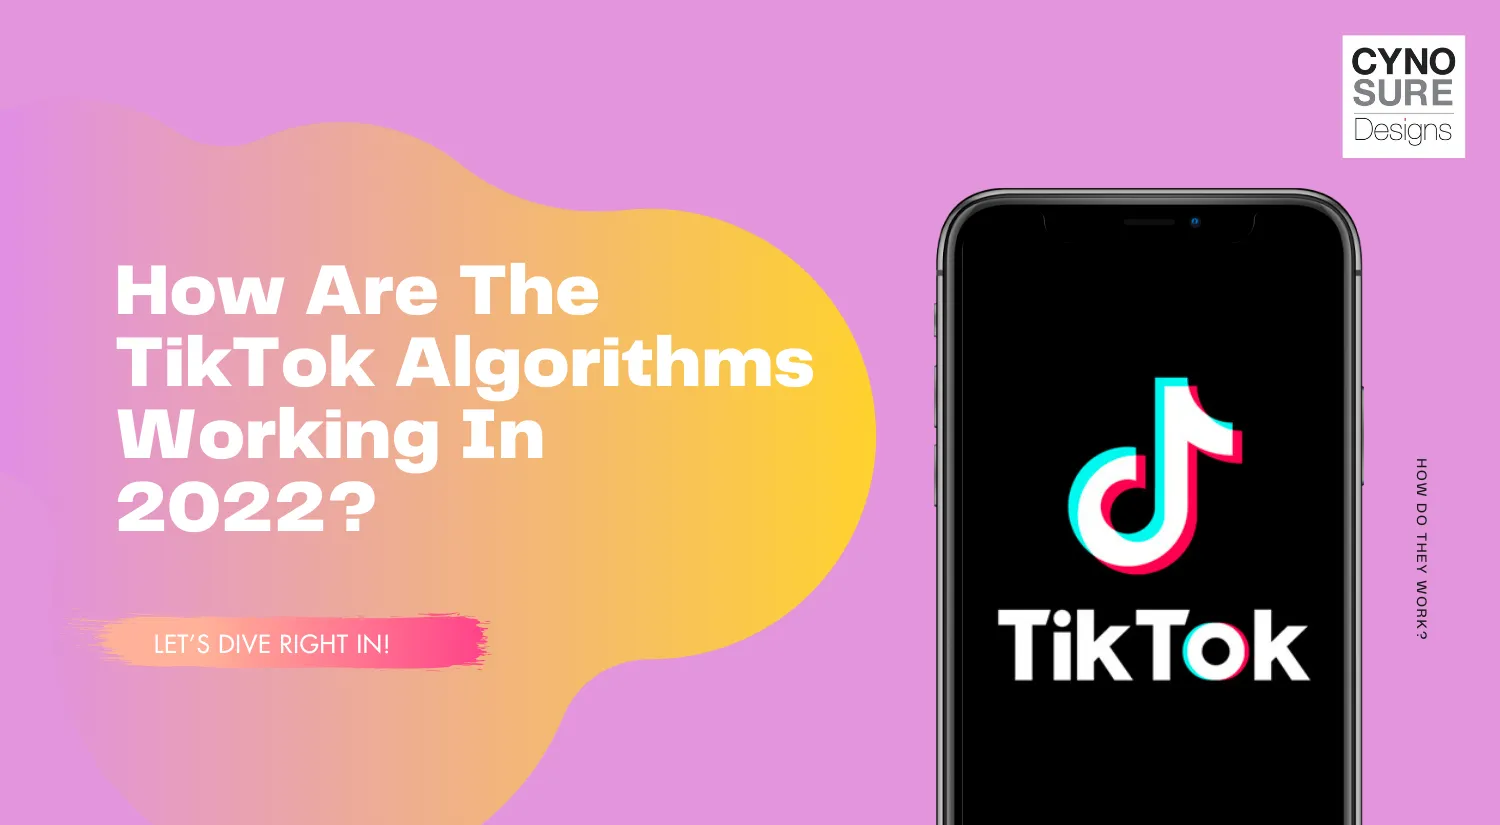 How are the TikTok Algorithms working in 2022?